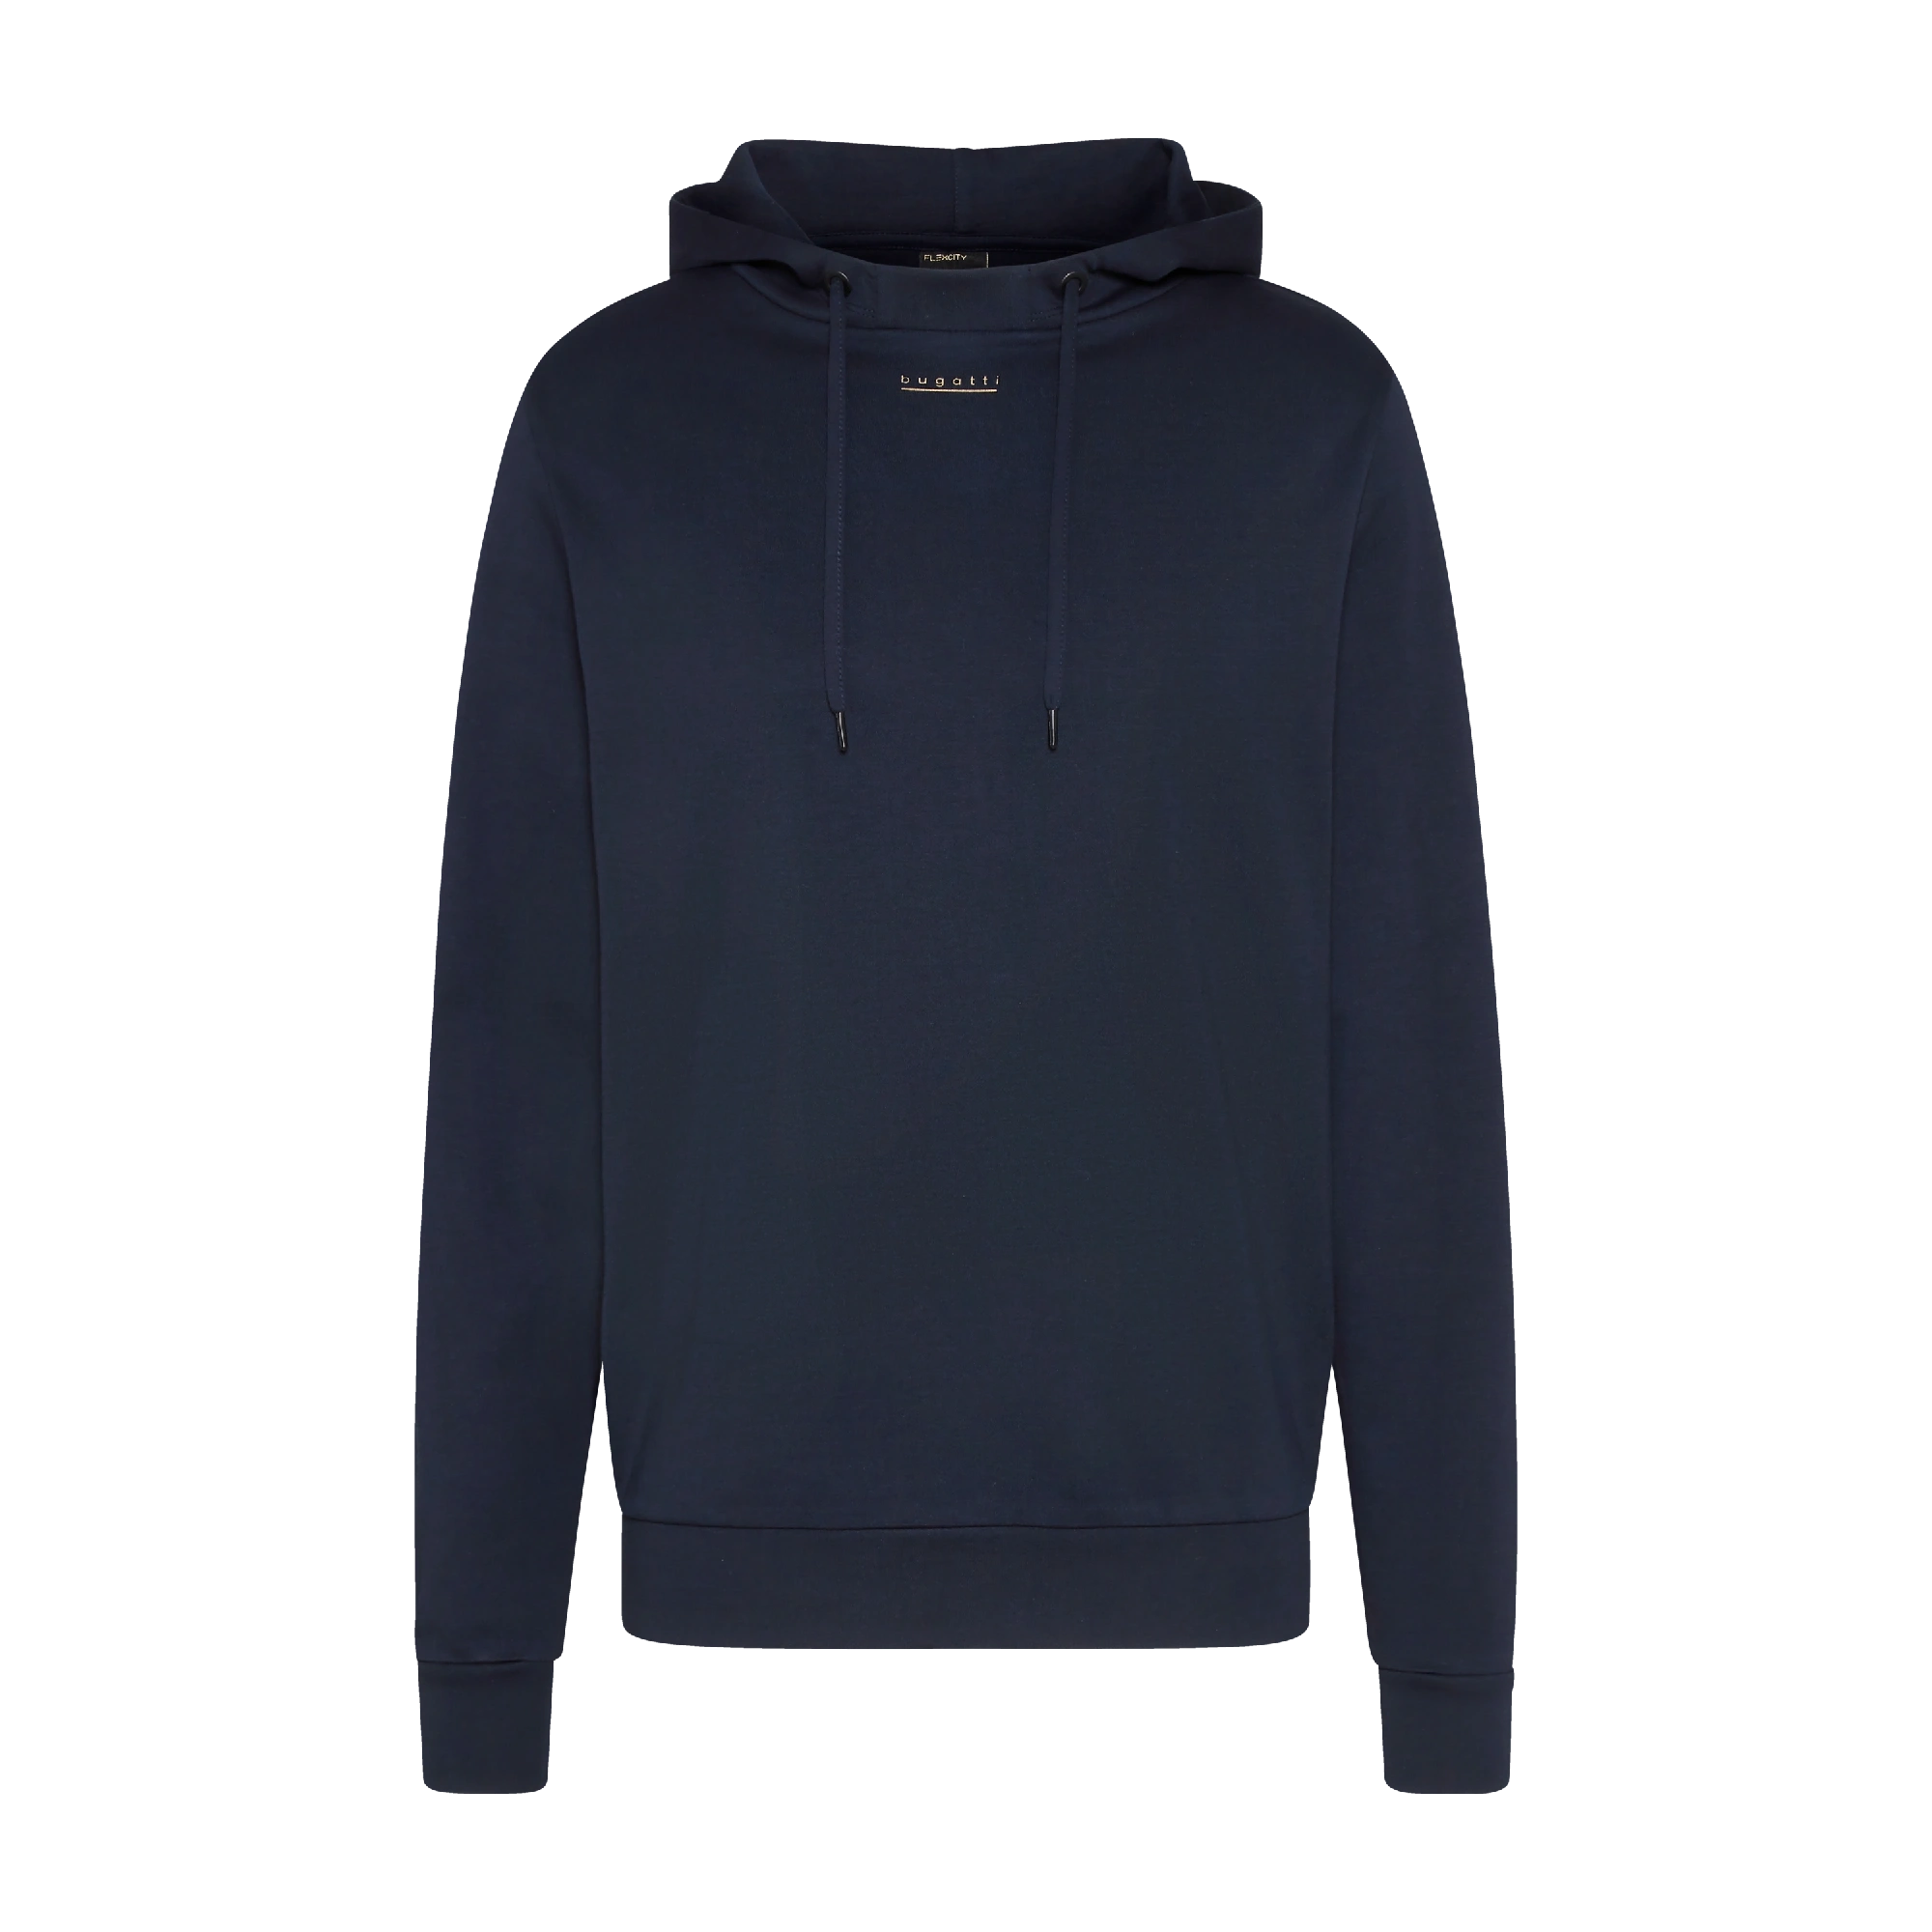 Hooded sweatshirt With small logo print in gold in navy | bugatti